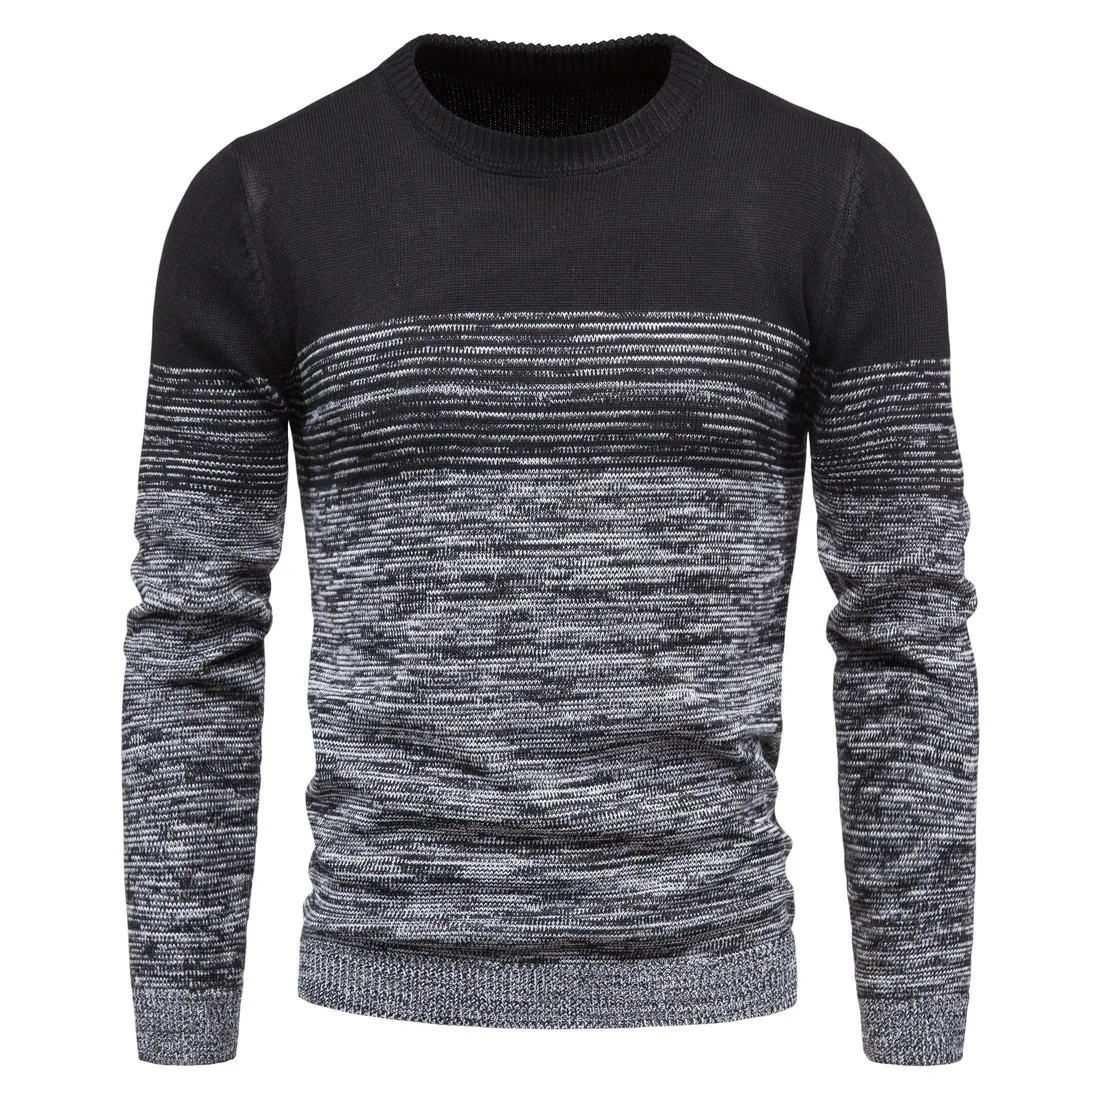 

New Autumn Men's Knitwear Hedging Round Neck Variegated Contrast Fashion Base Sweater Male Tops